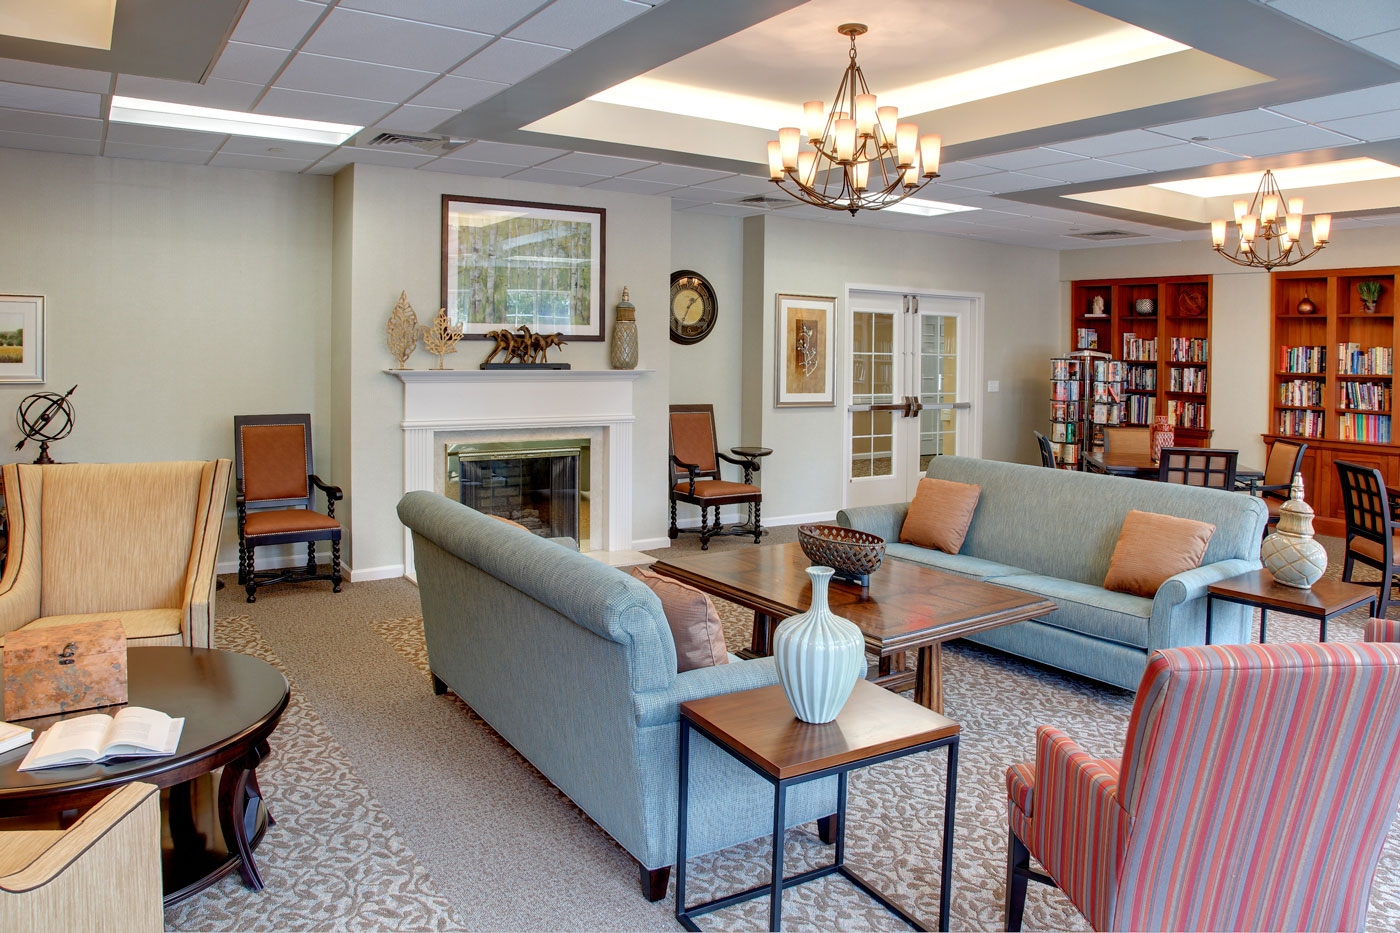 Our interior design for an inviting social area in a memory care community